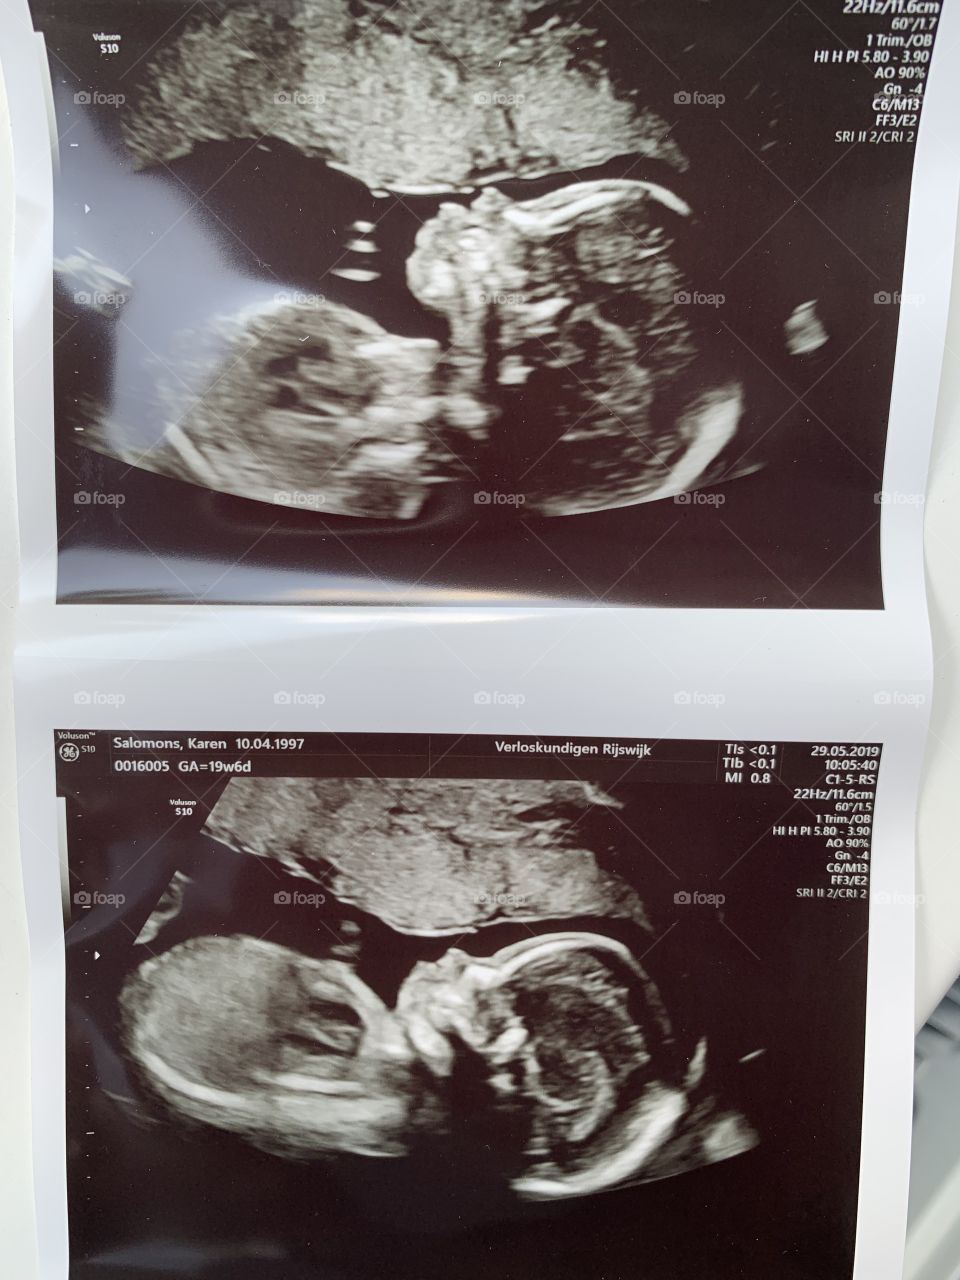 Just found out that I’m having a beautiful baby boy!!